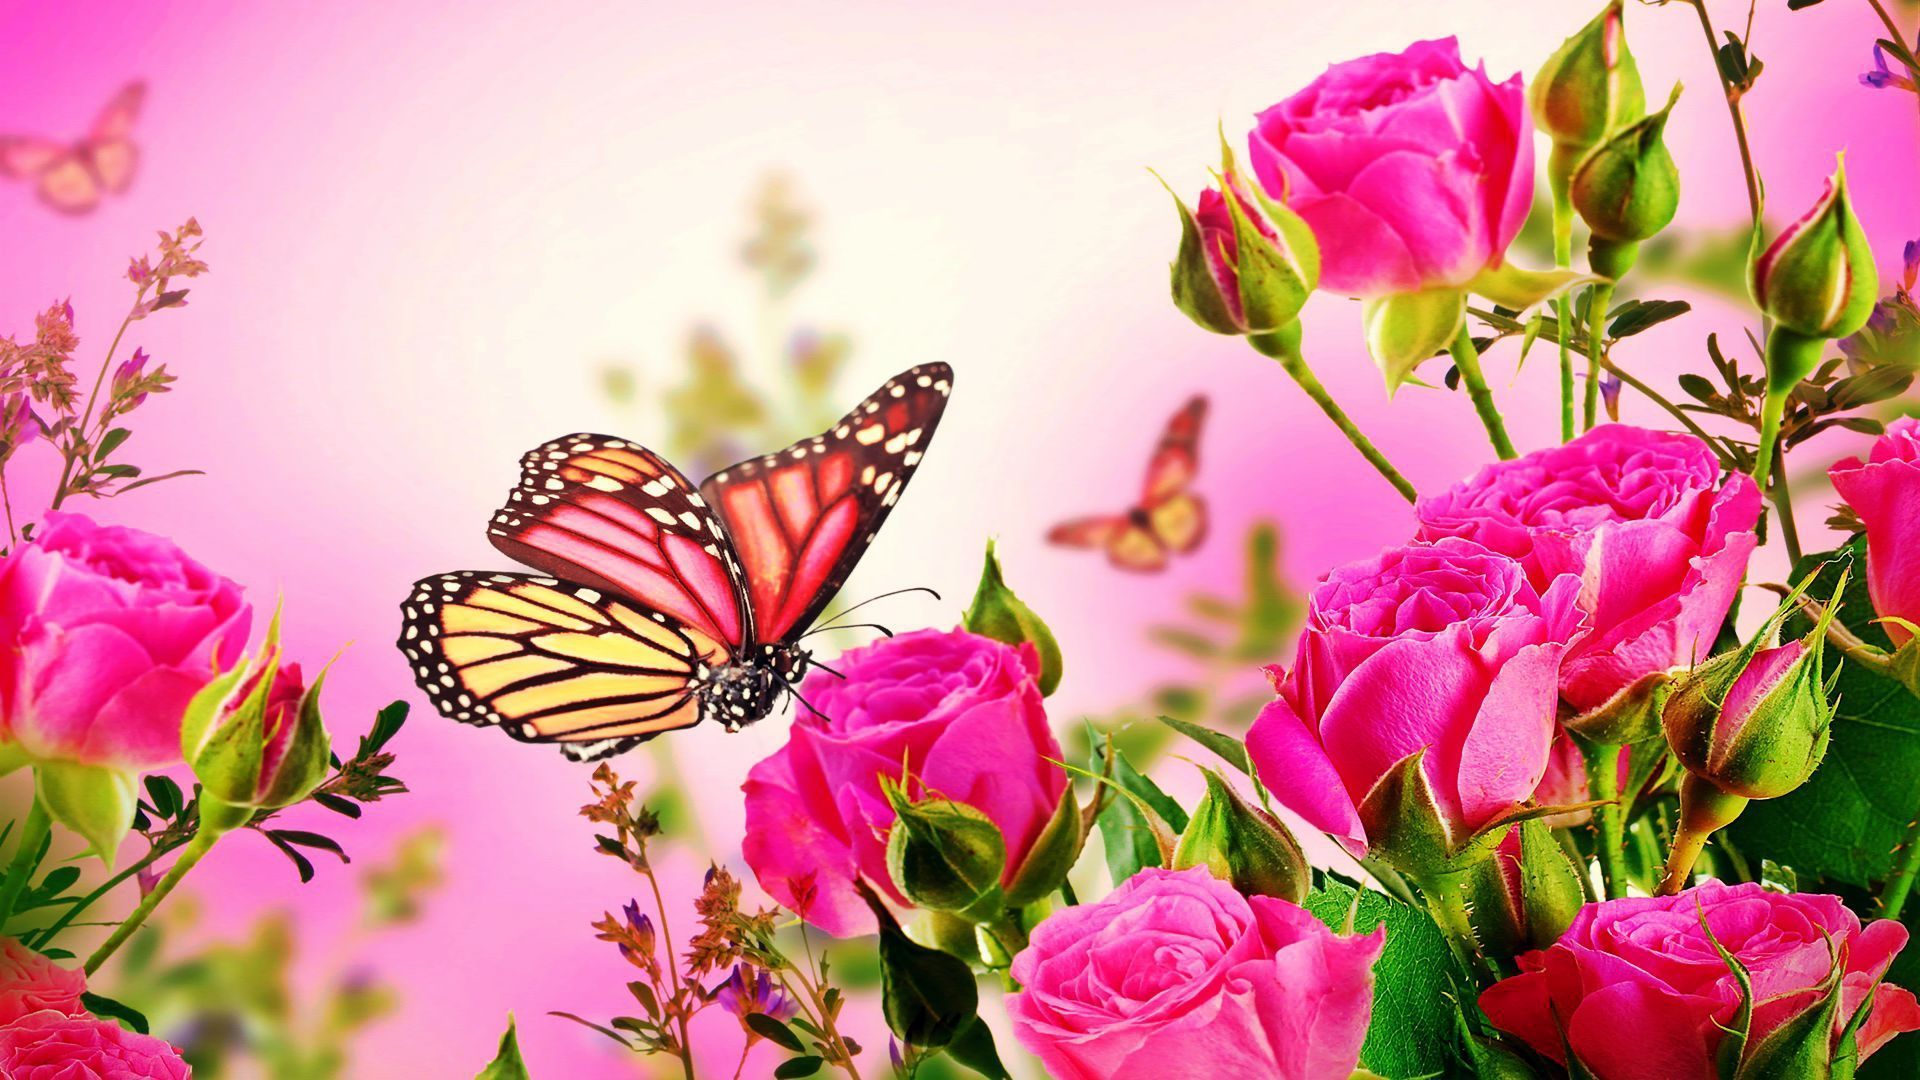 Pink Roses and Butterfly Wallpaper Free Pink Roses